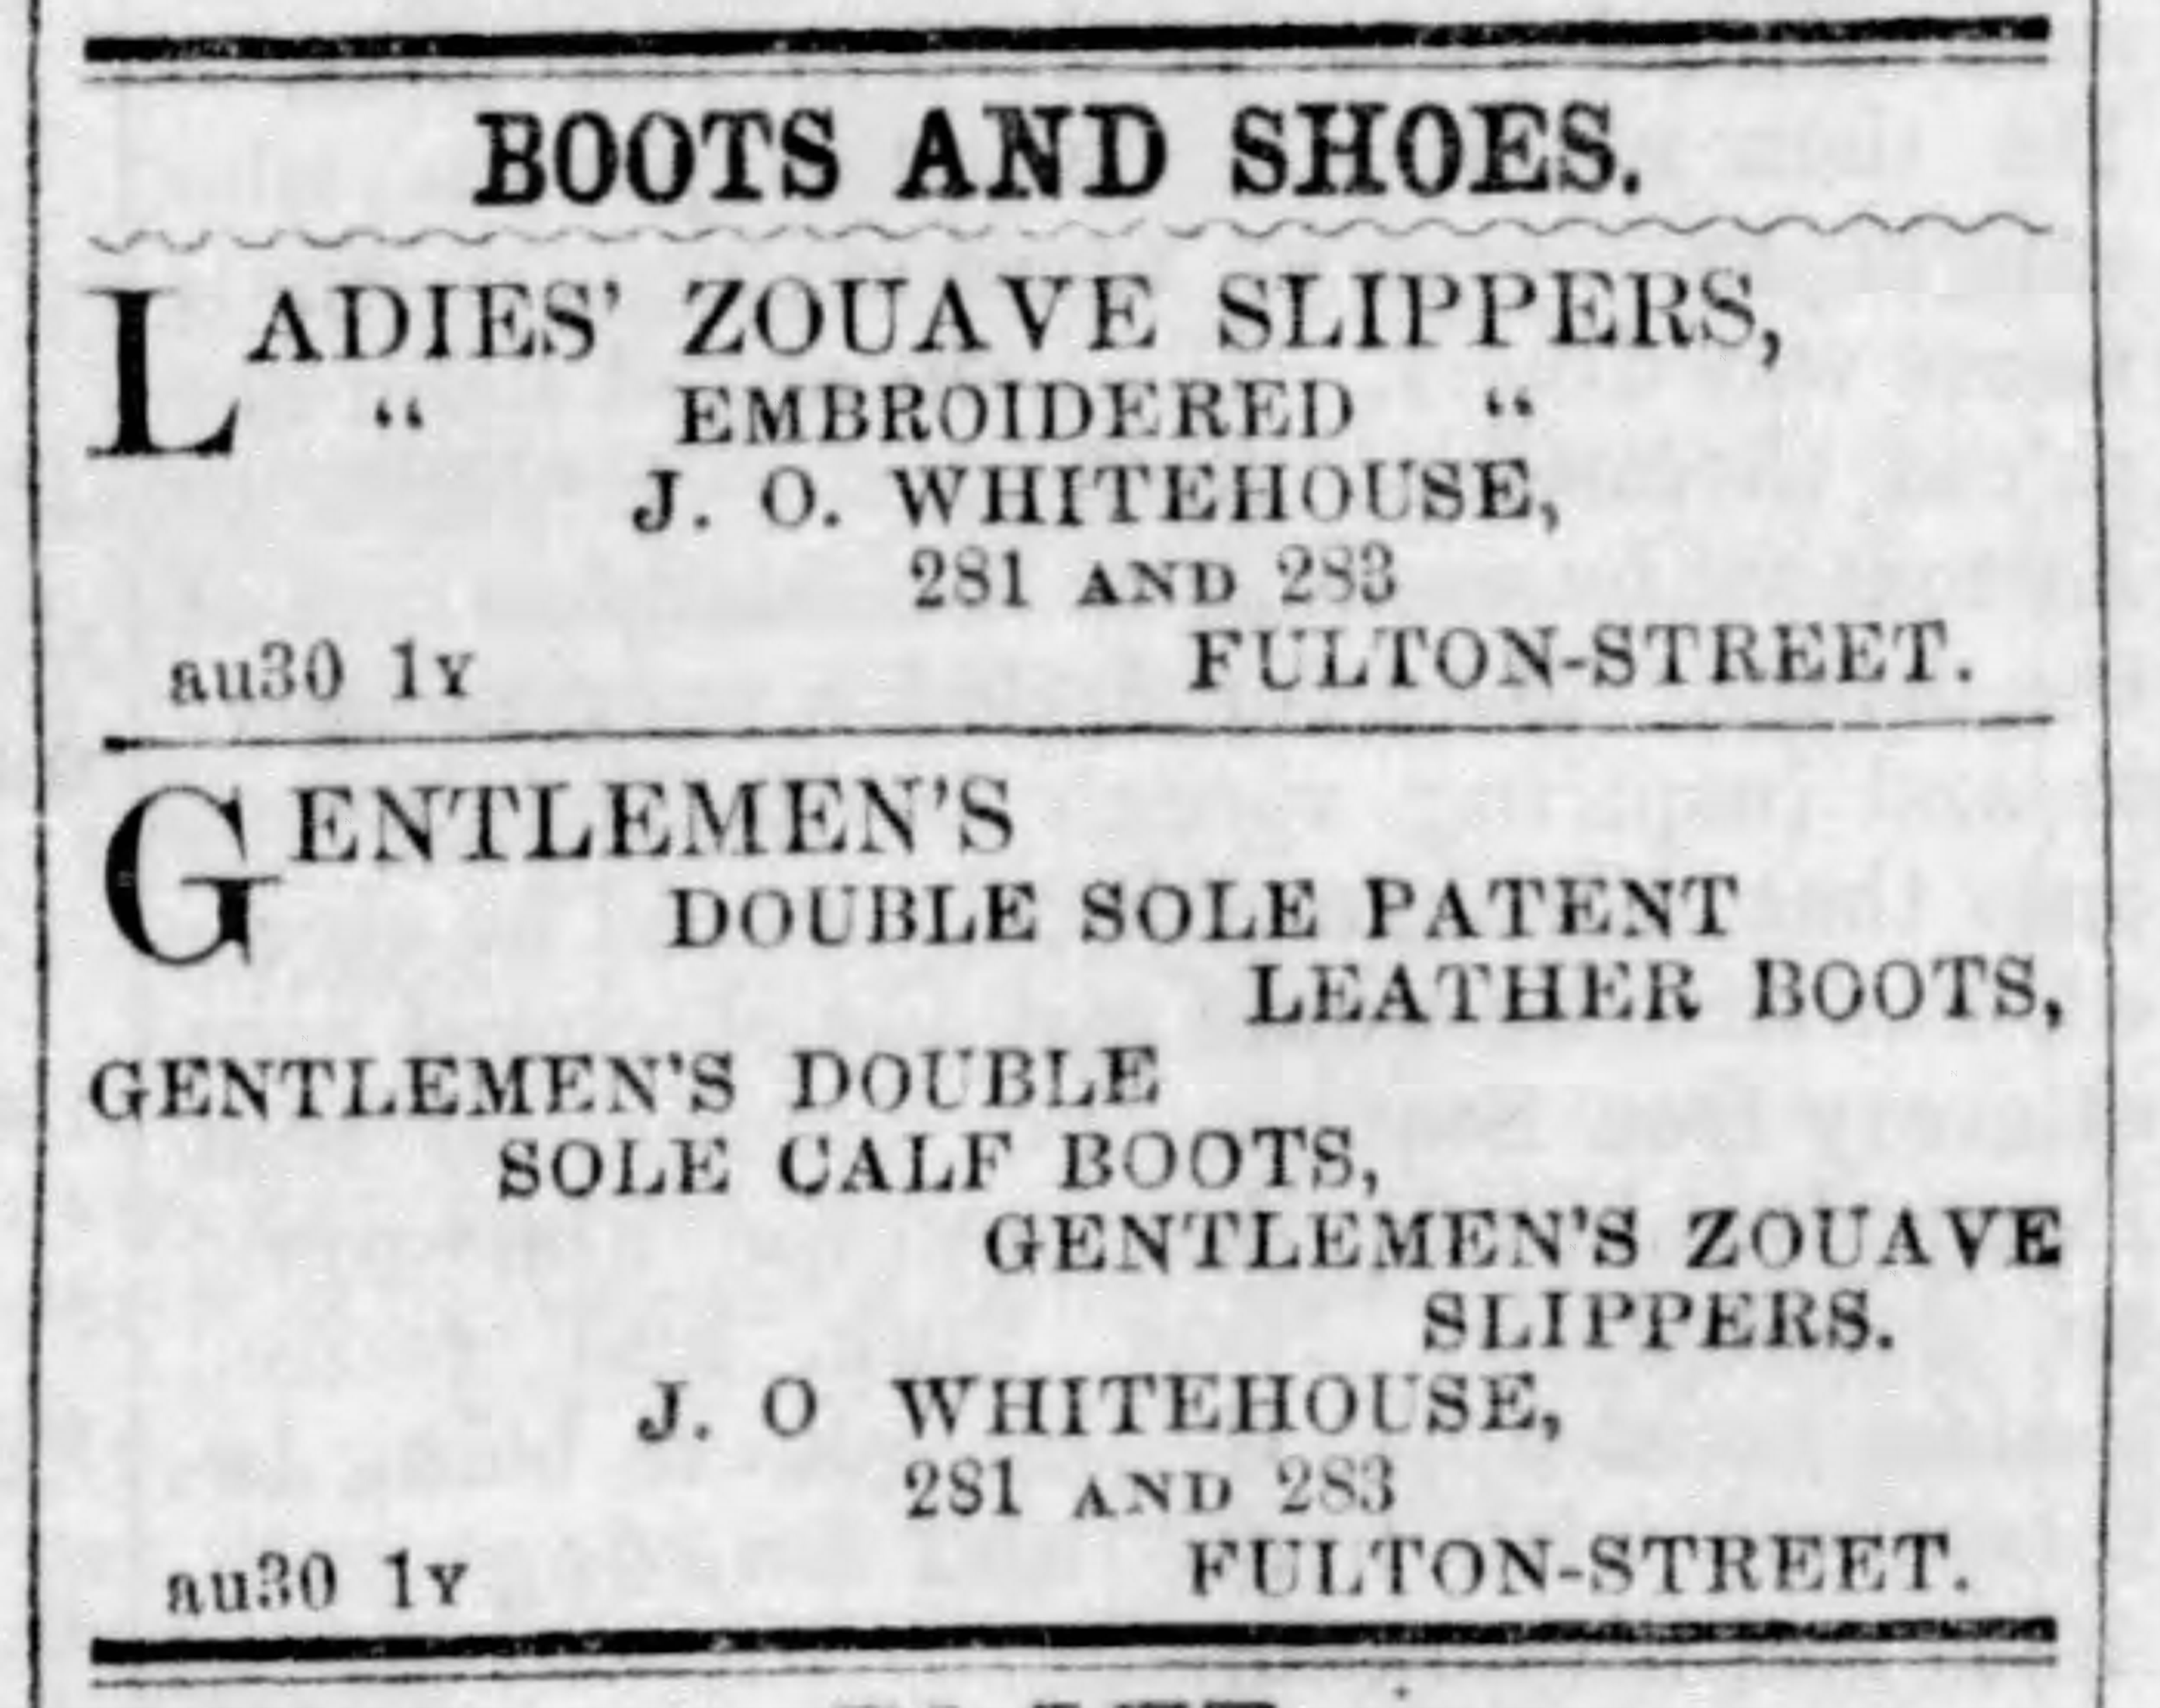 Brooklyn Evening Star, October 27, 1860. Ladies and Gentlemen's Zouave Slippers.